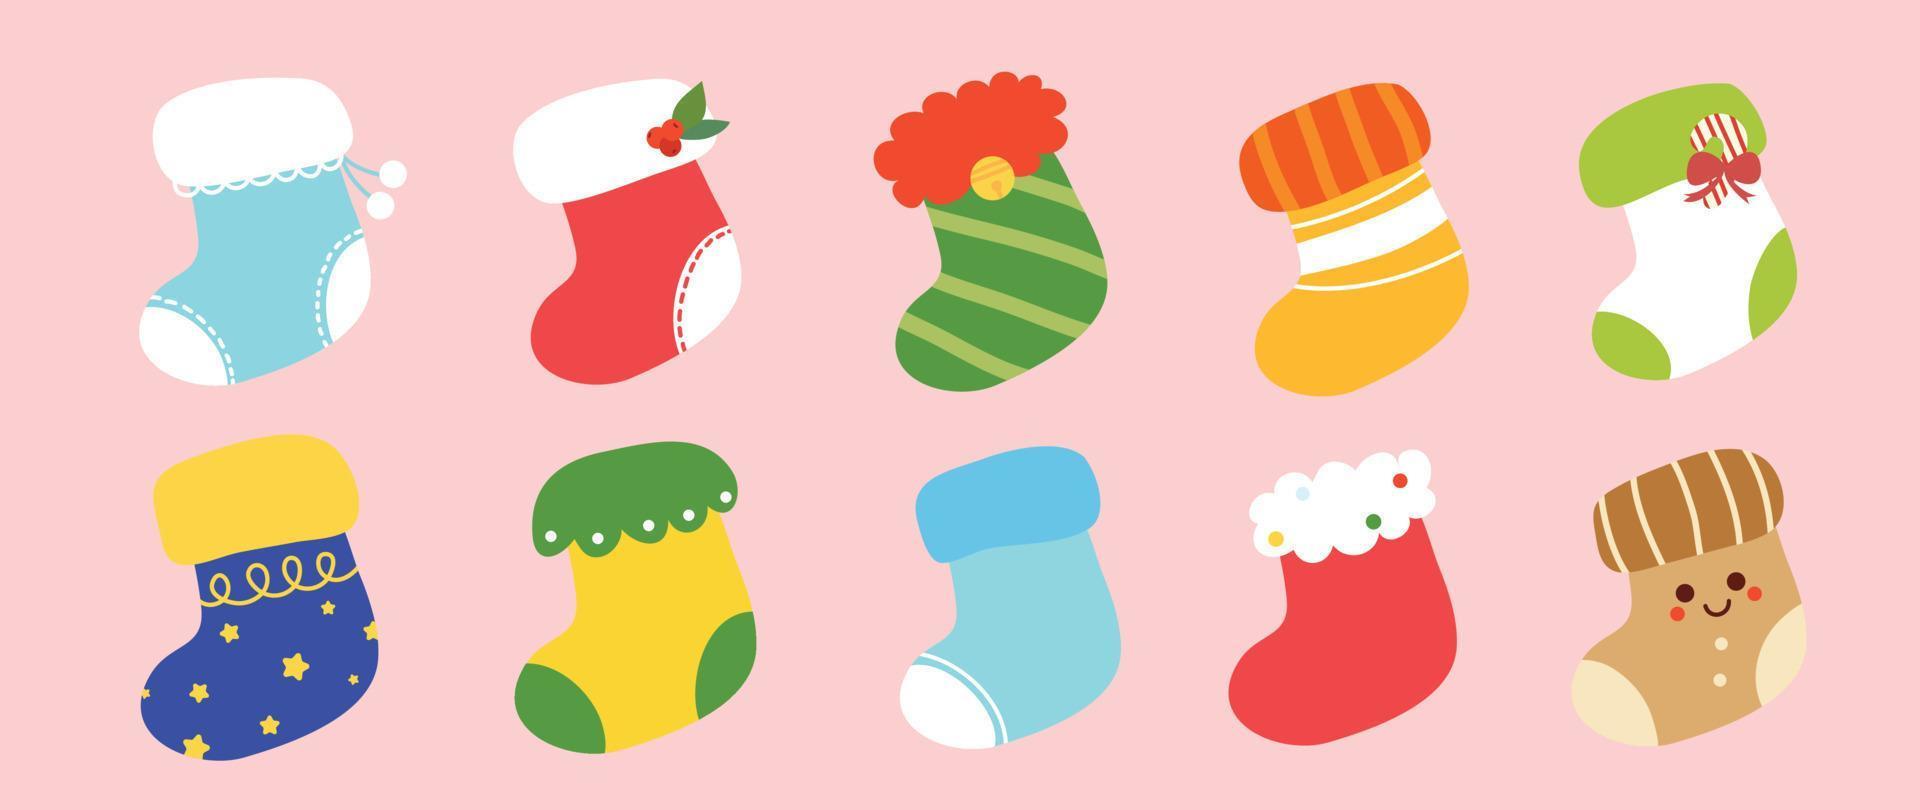 Set of christmas socks background vector illustration. Collection of decorative cute vibrant knitted socks in different style. Design for christmas decoration, invitation card, greeting, poster.